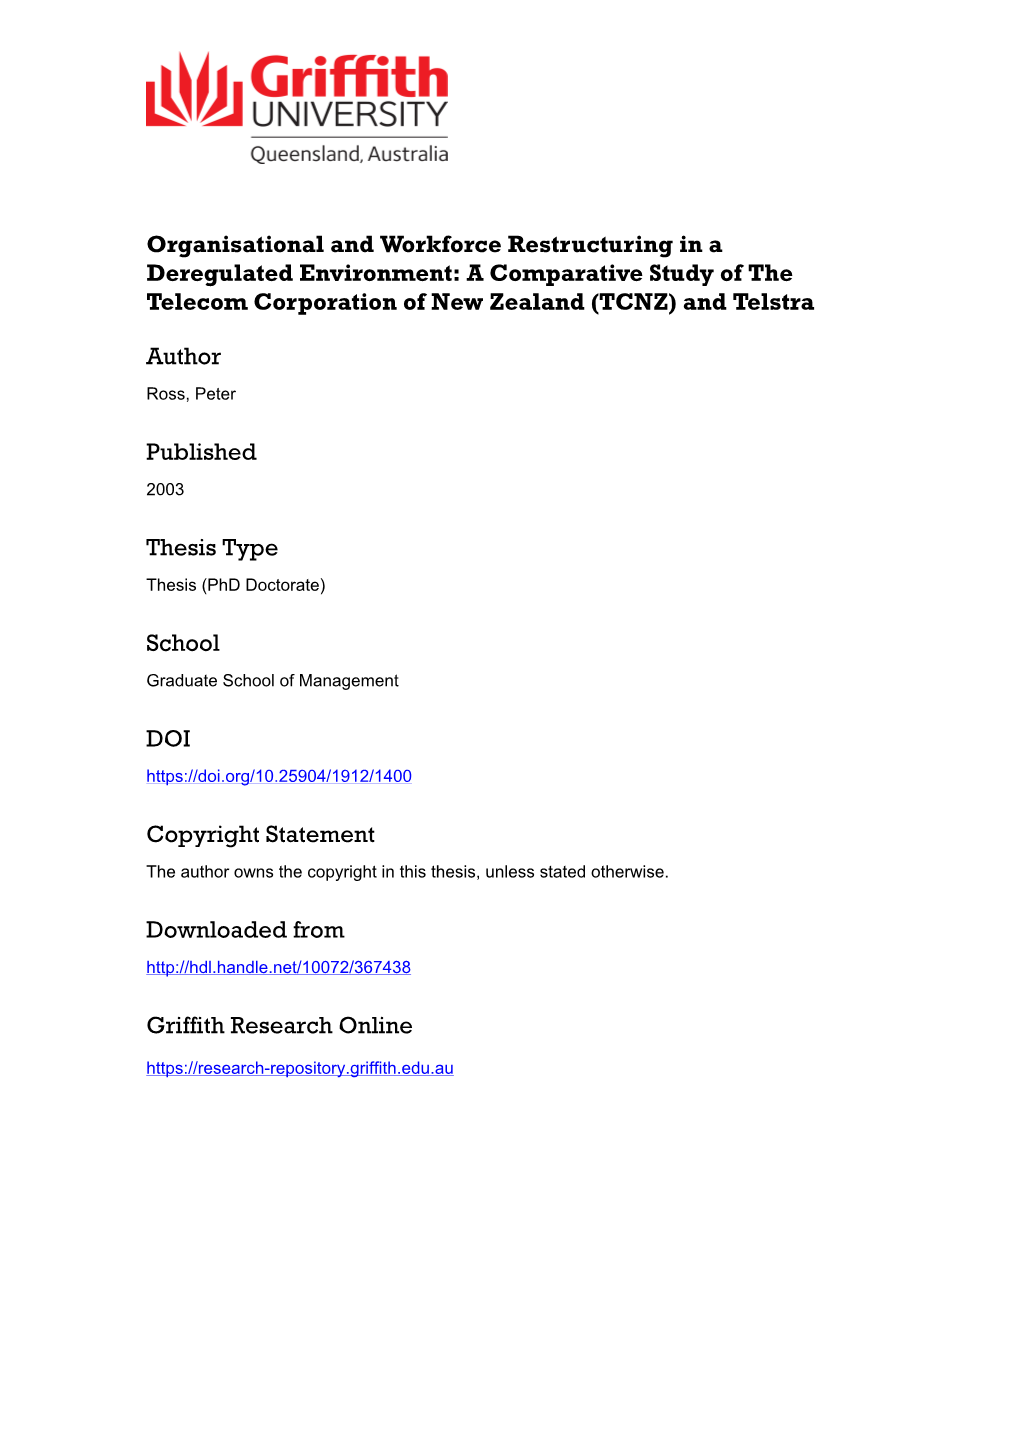 Organisational and Workforce Restructuring in a Deregulated Environment: a Comparative Study of the Telecom Corporation of New Zealand (TCNZ) and Telstra